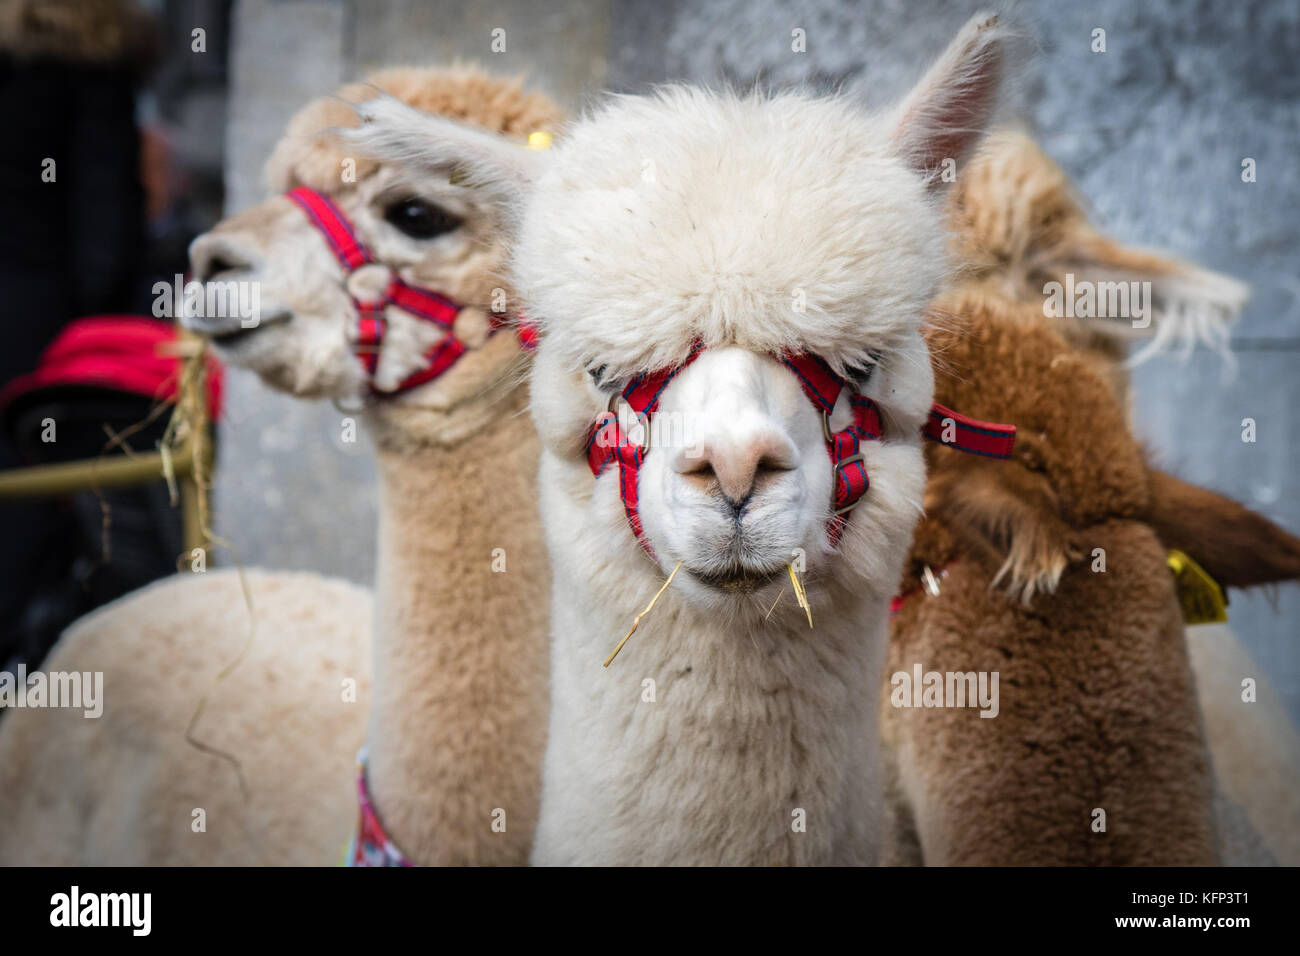 The Alpacas created alot of interest on show at Savour Kilkenny Food Festival, Kilkenny, ireland 27th and 28th October 2017 Stock Photo